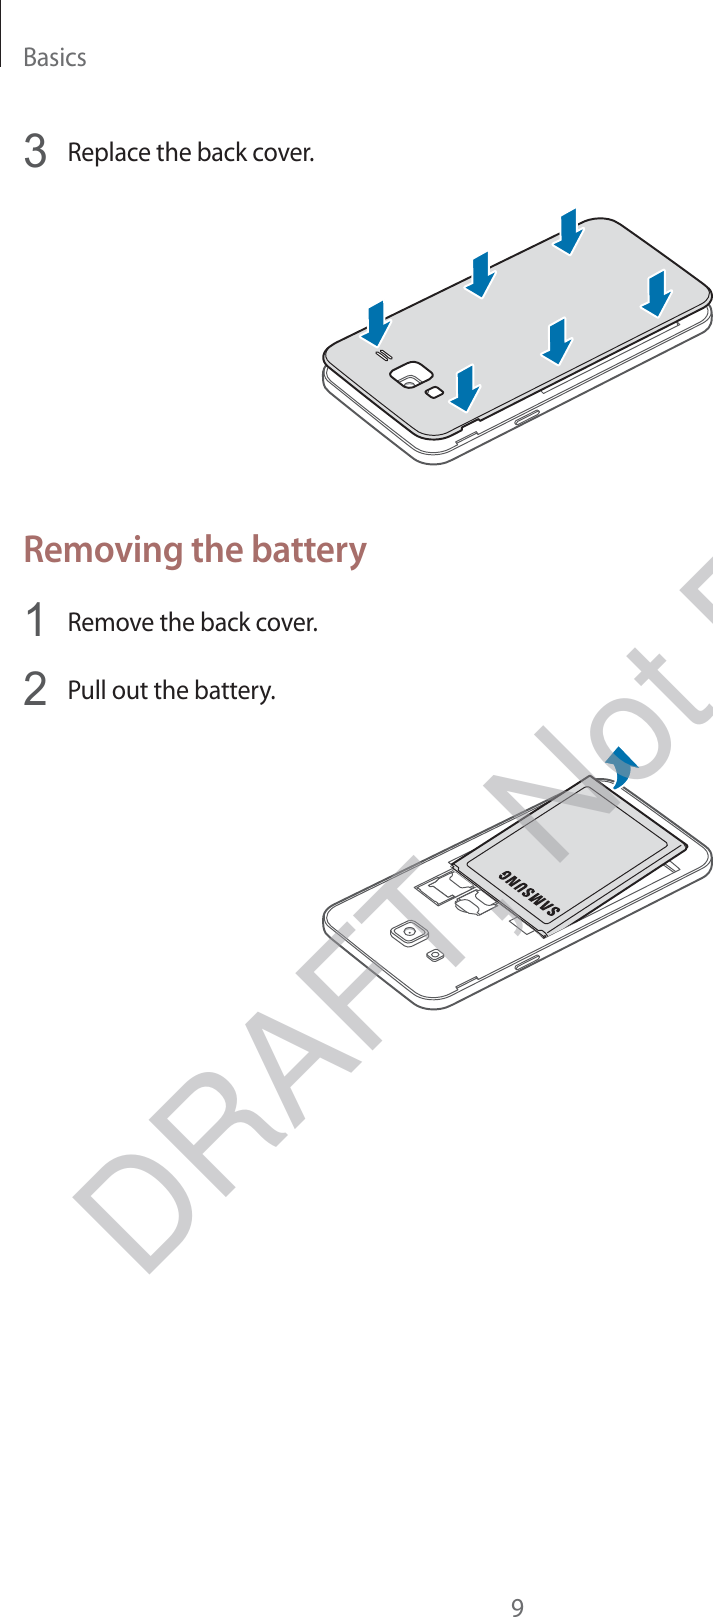 Basics93 Replace the back cover.Removing the battery1 Remove the back cover.2 Pull out the battery.DRAFT, Not Final